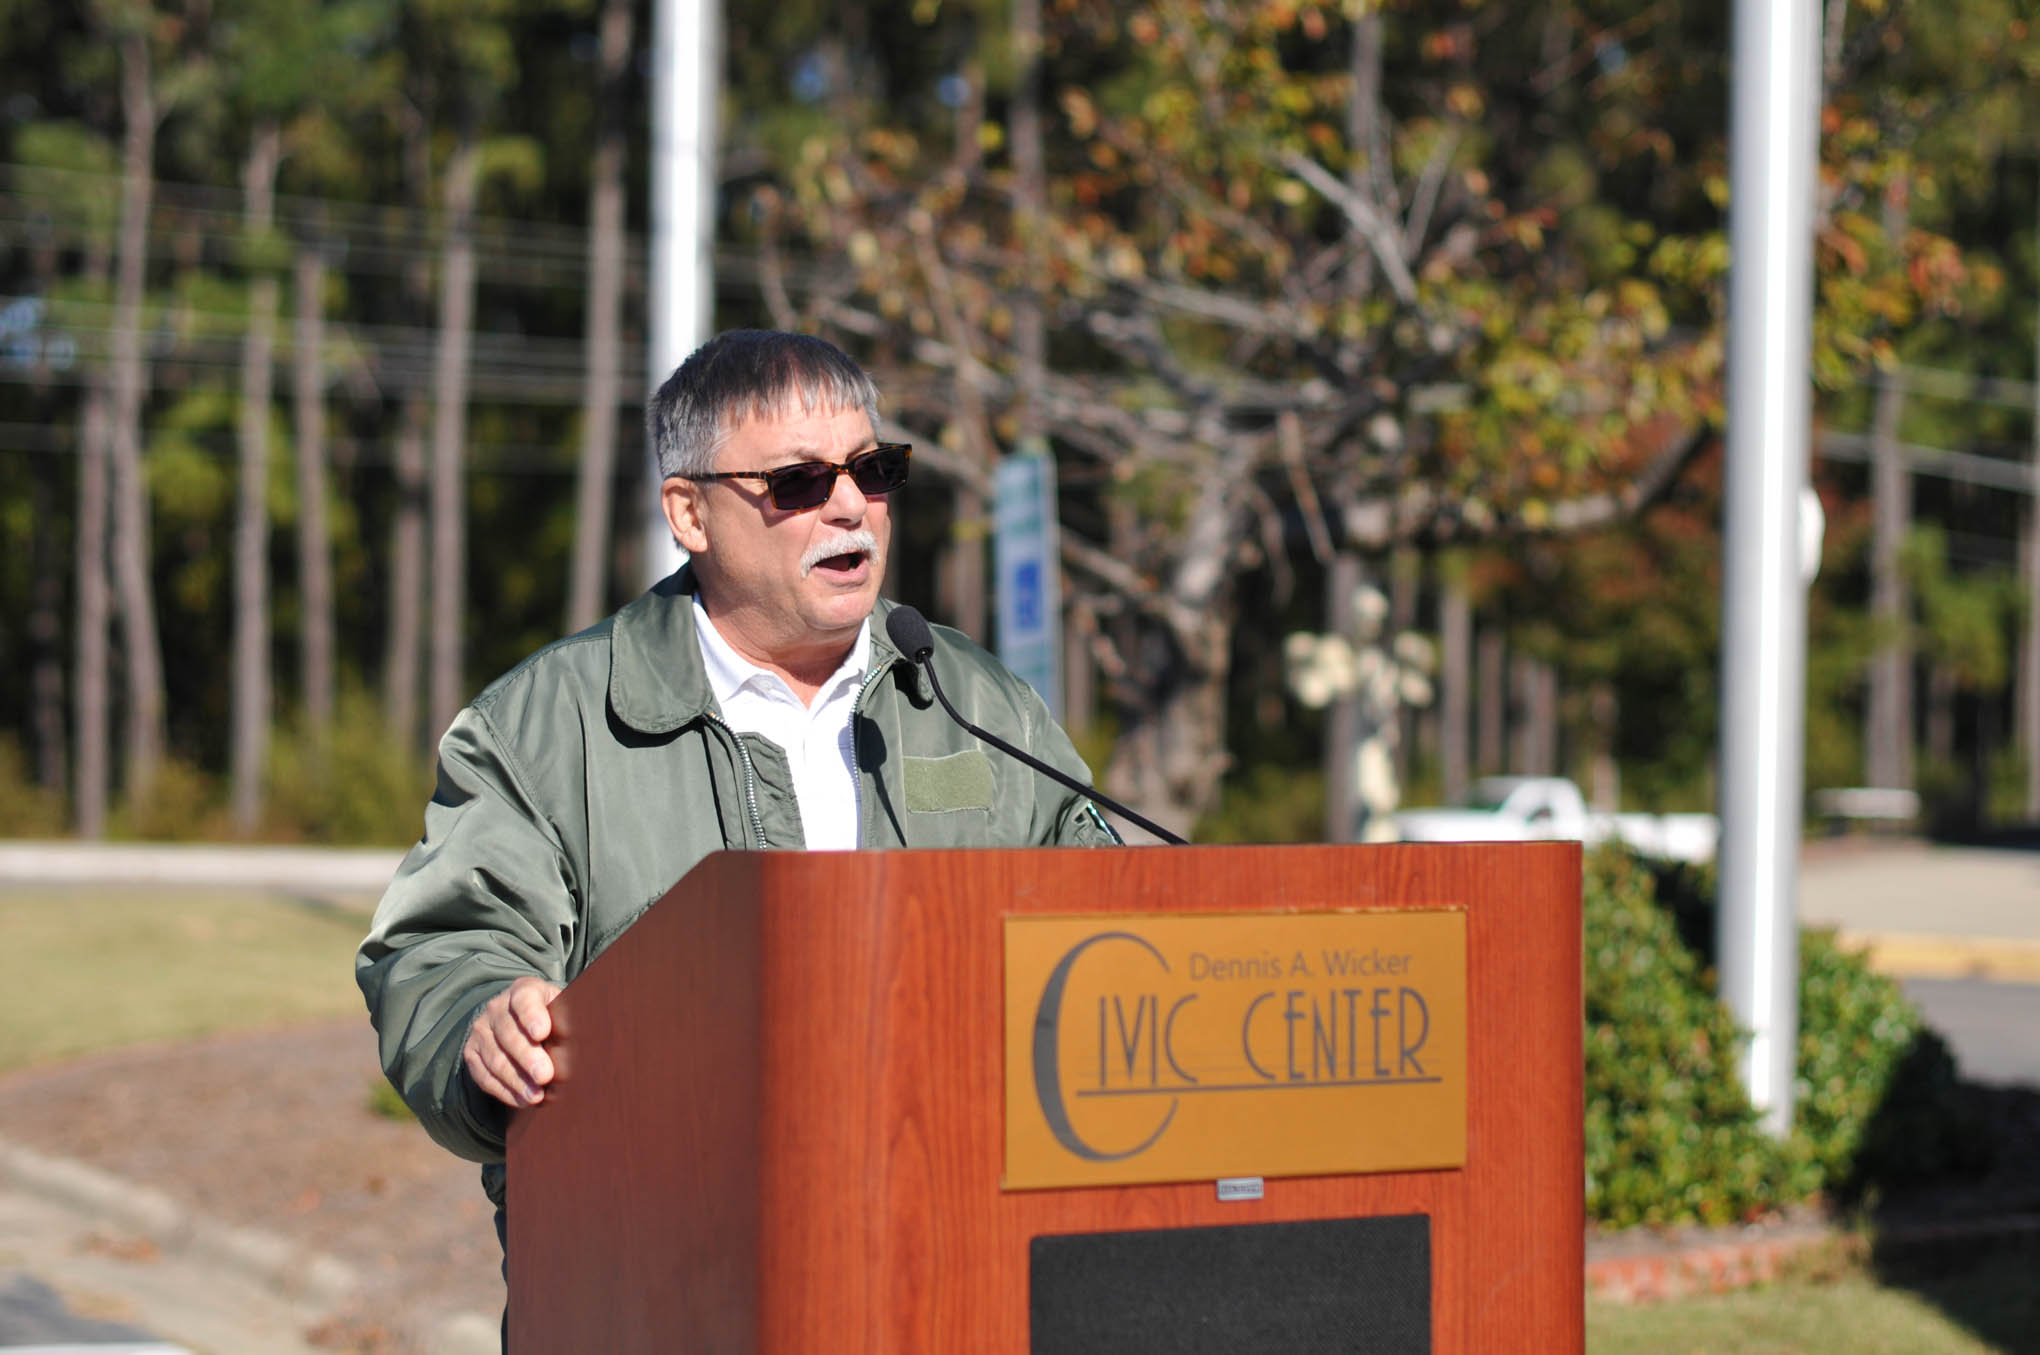 Click to enlarge,  Richard C. Biggs, MSgt., U.S. Air Force Retired, who currently serves as an instructor in Central Carolina Community College's Information Technology program, was Master of Ceremony at the Veterans Day observance on Thursday, Nov. 10, at the Dennis A. Wicker Civic Center. 